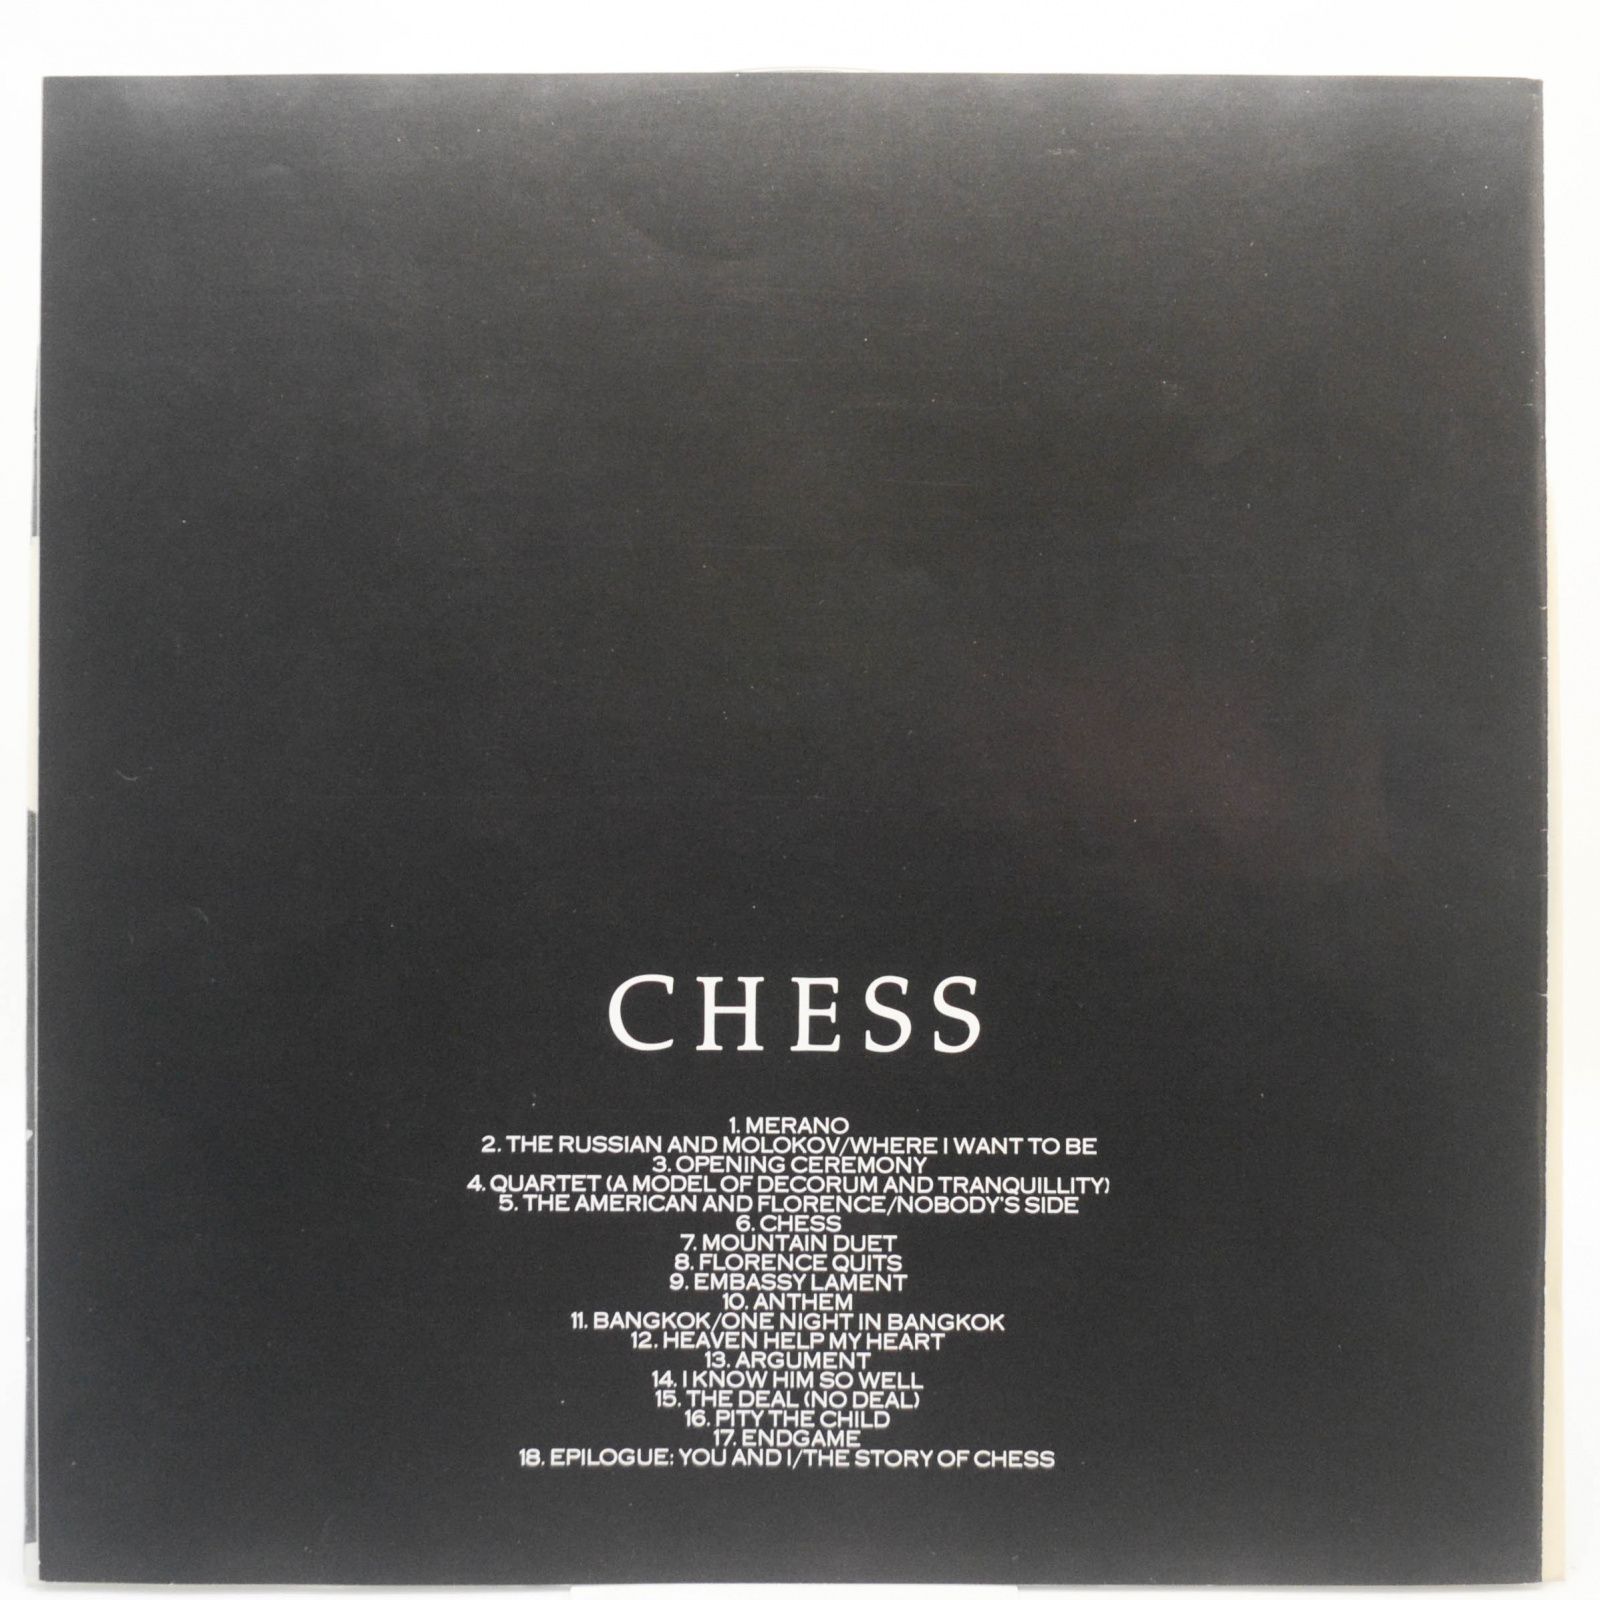 Benny Andersson, Tim Rice, Björn Ulvaeus — Chess (2LP, booklet), 1984